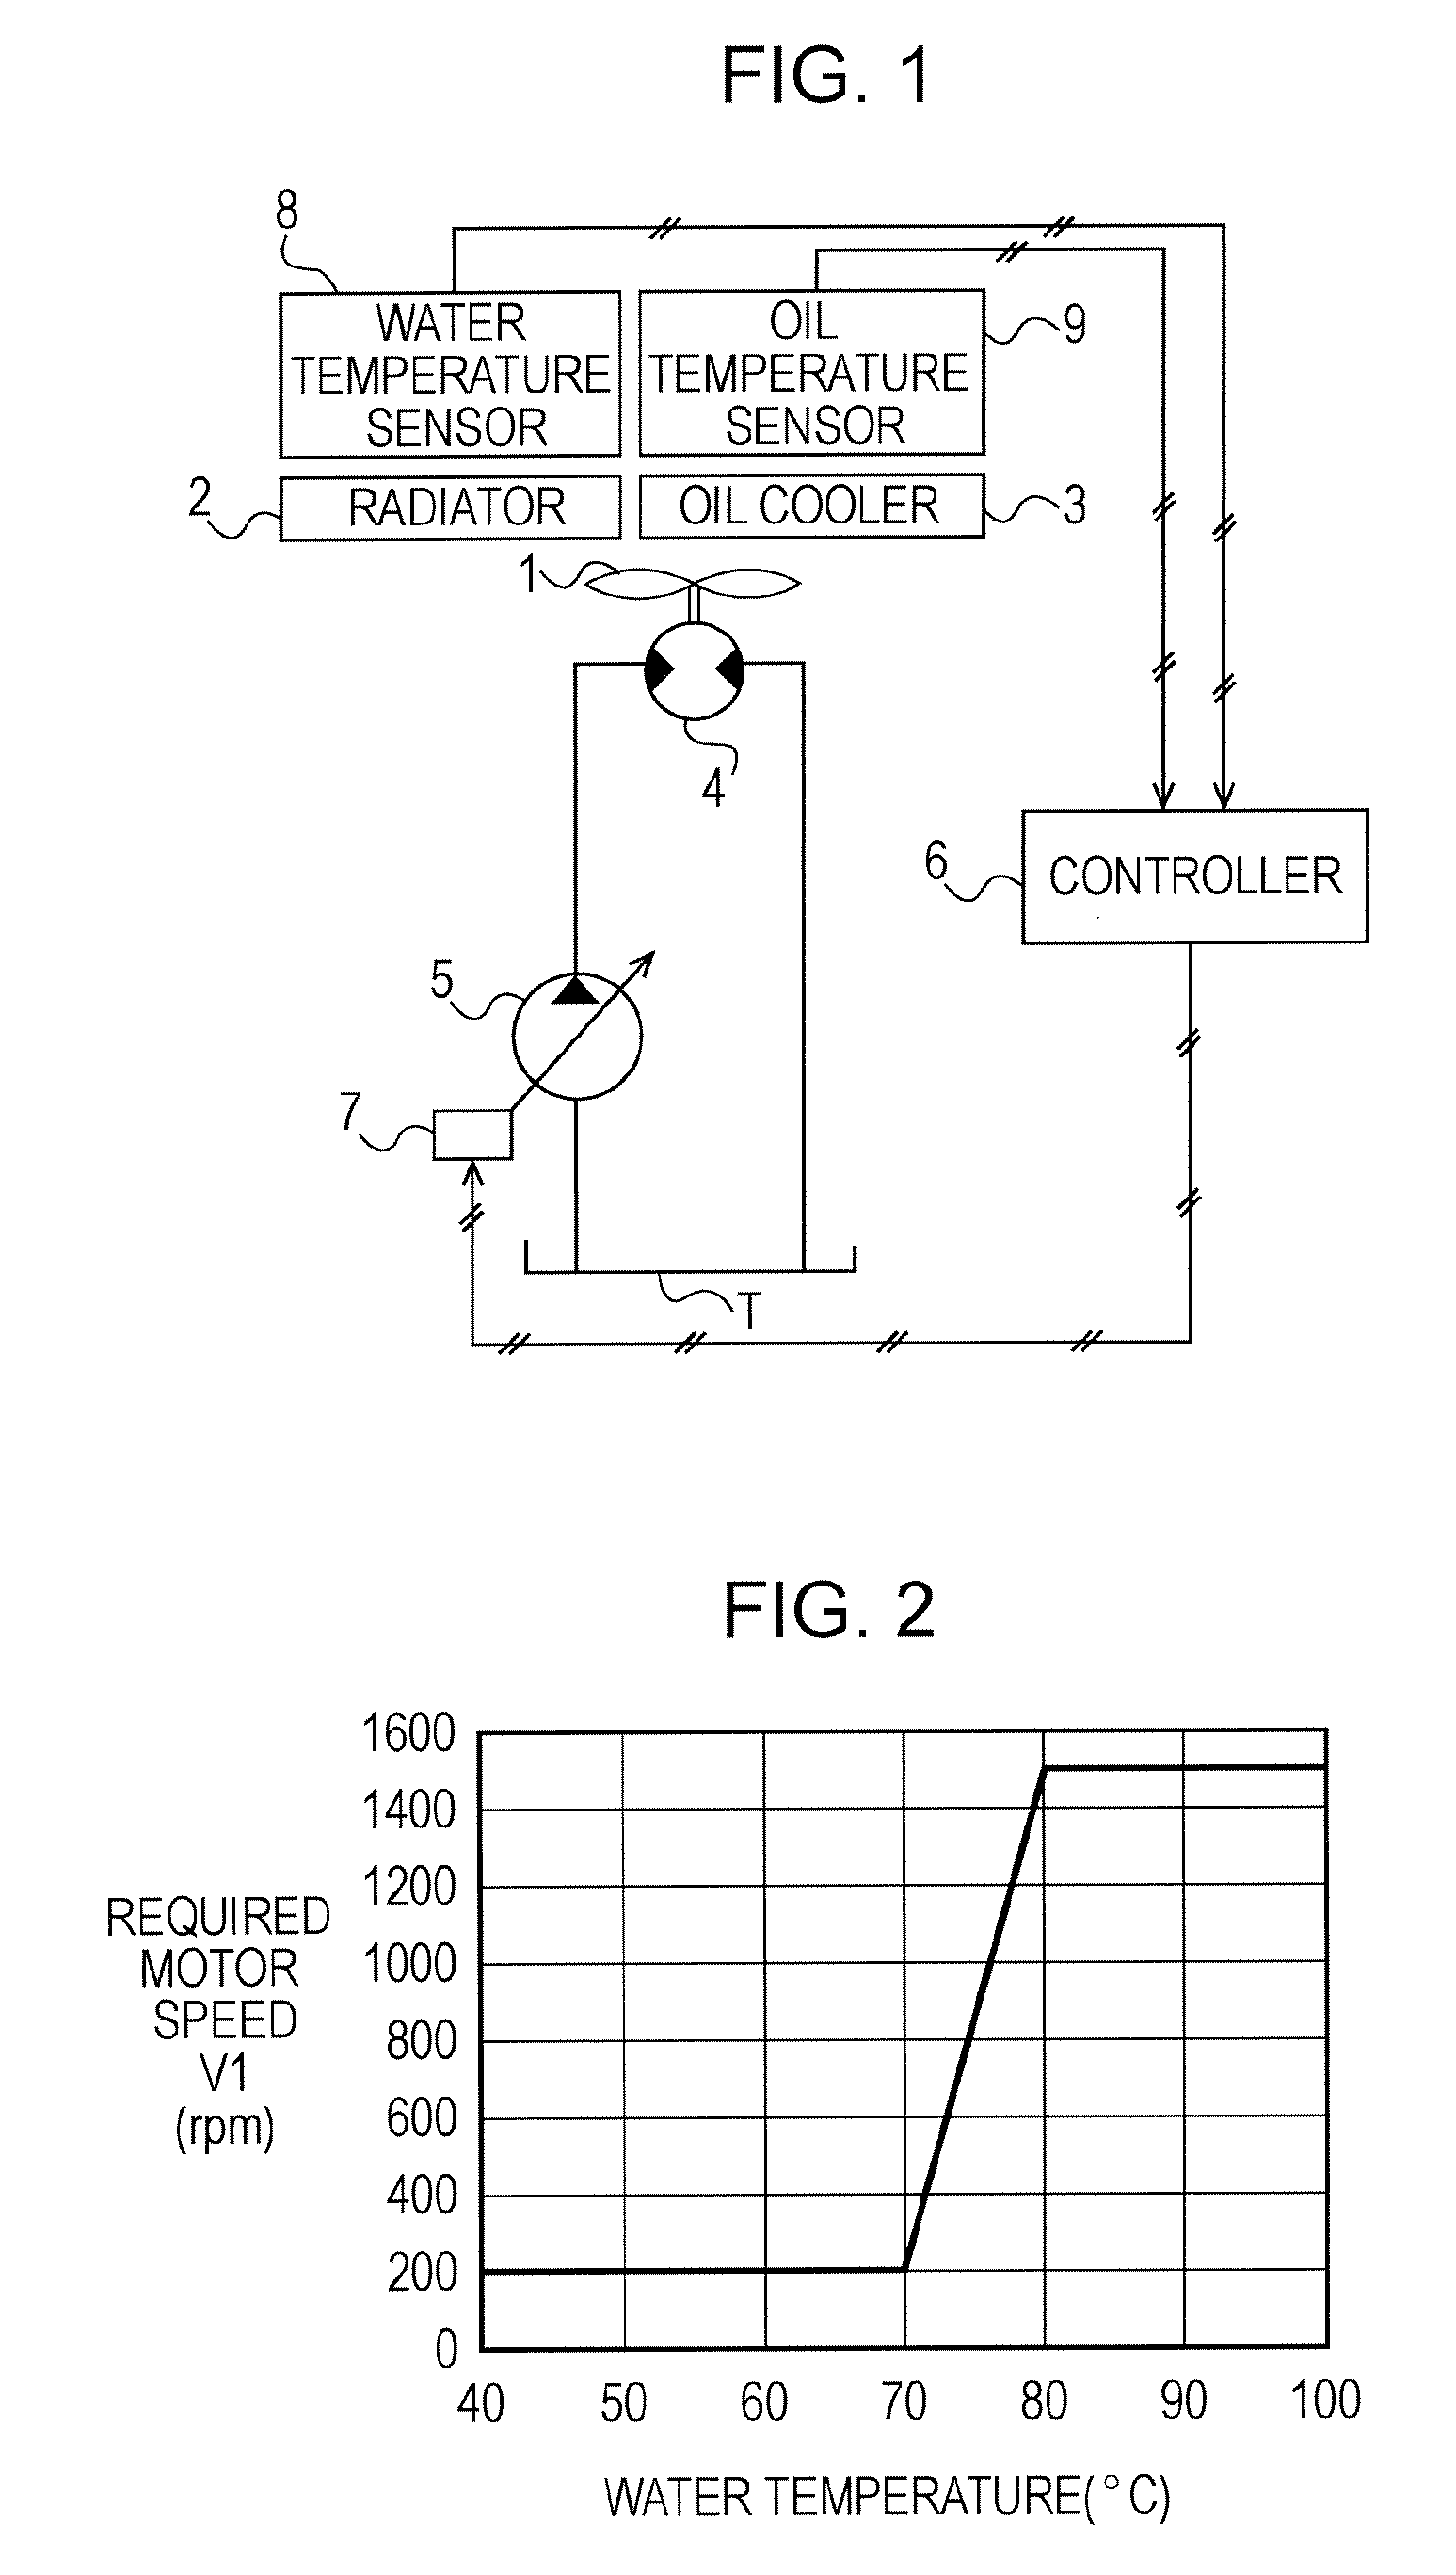 Controlling system for cooling fan